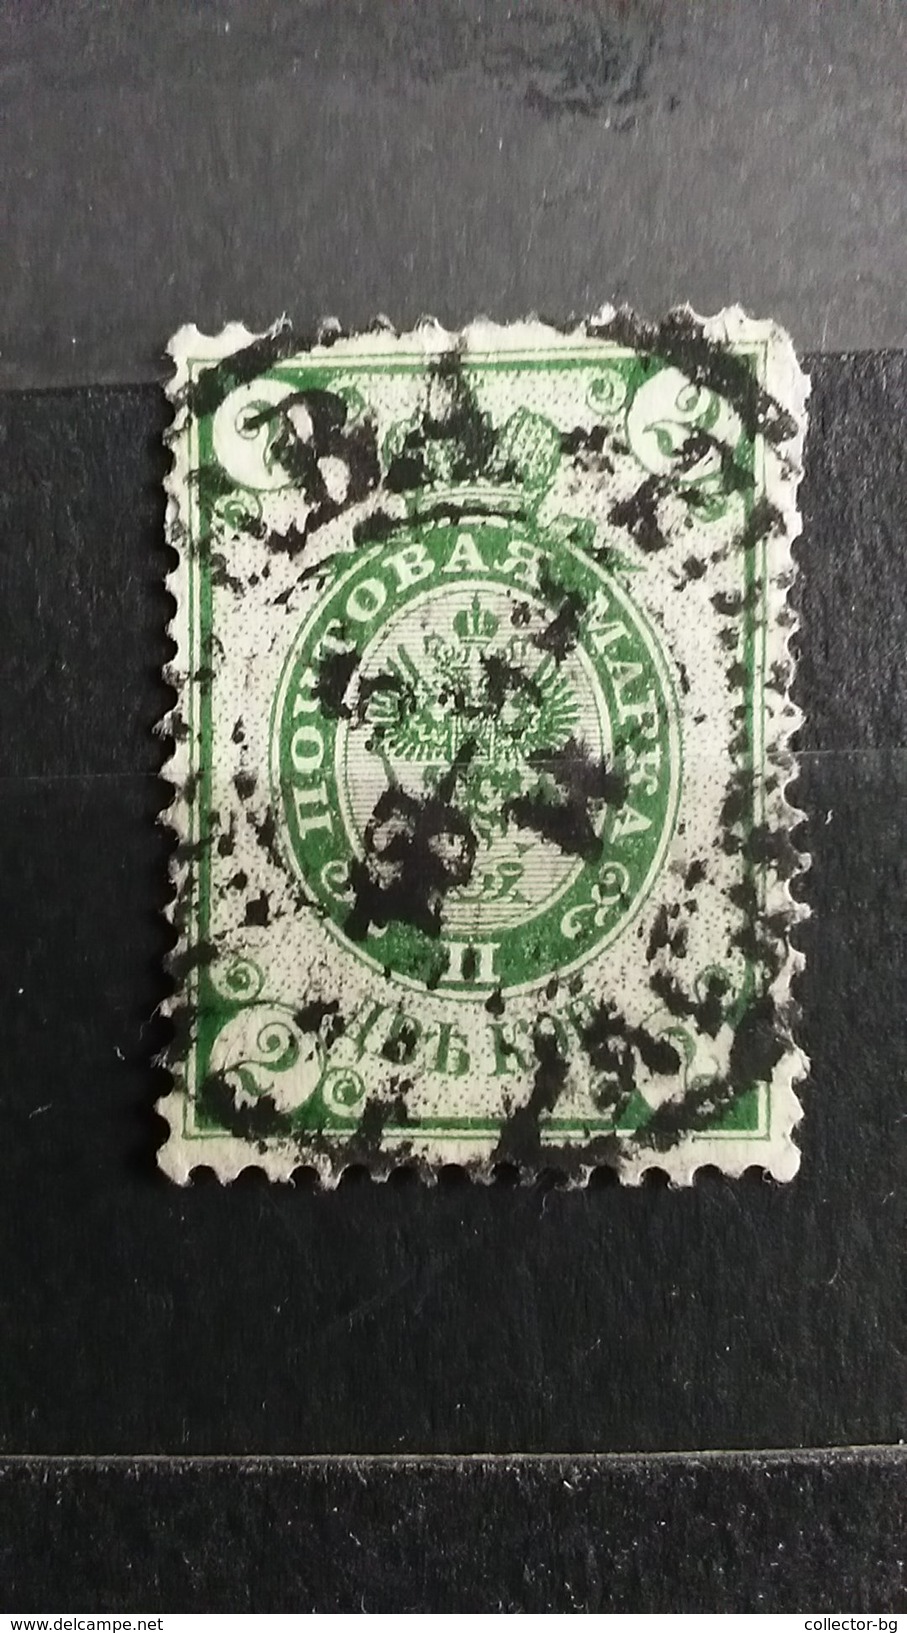 RARE 2 KOP RUSSIA WMK GREEN STAMP TIMBRE - Unused Stamps